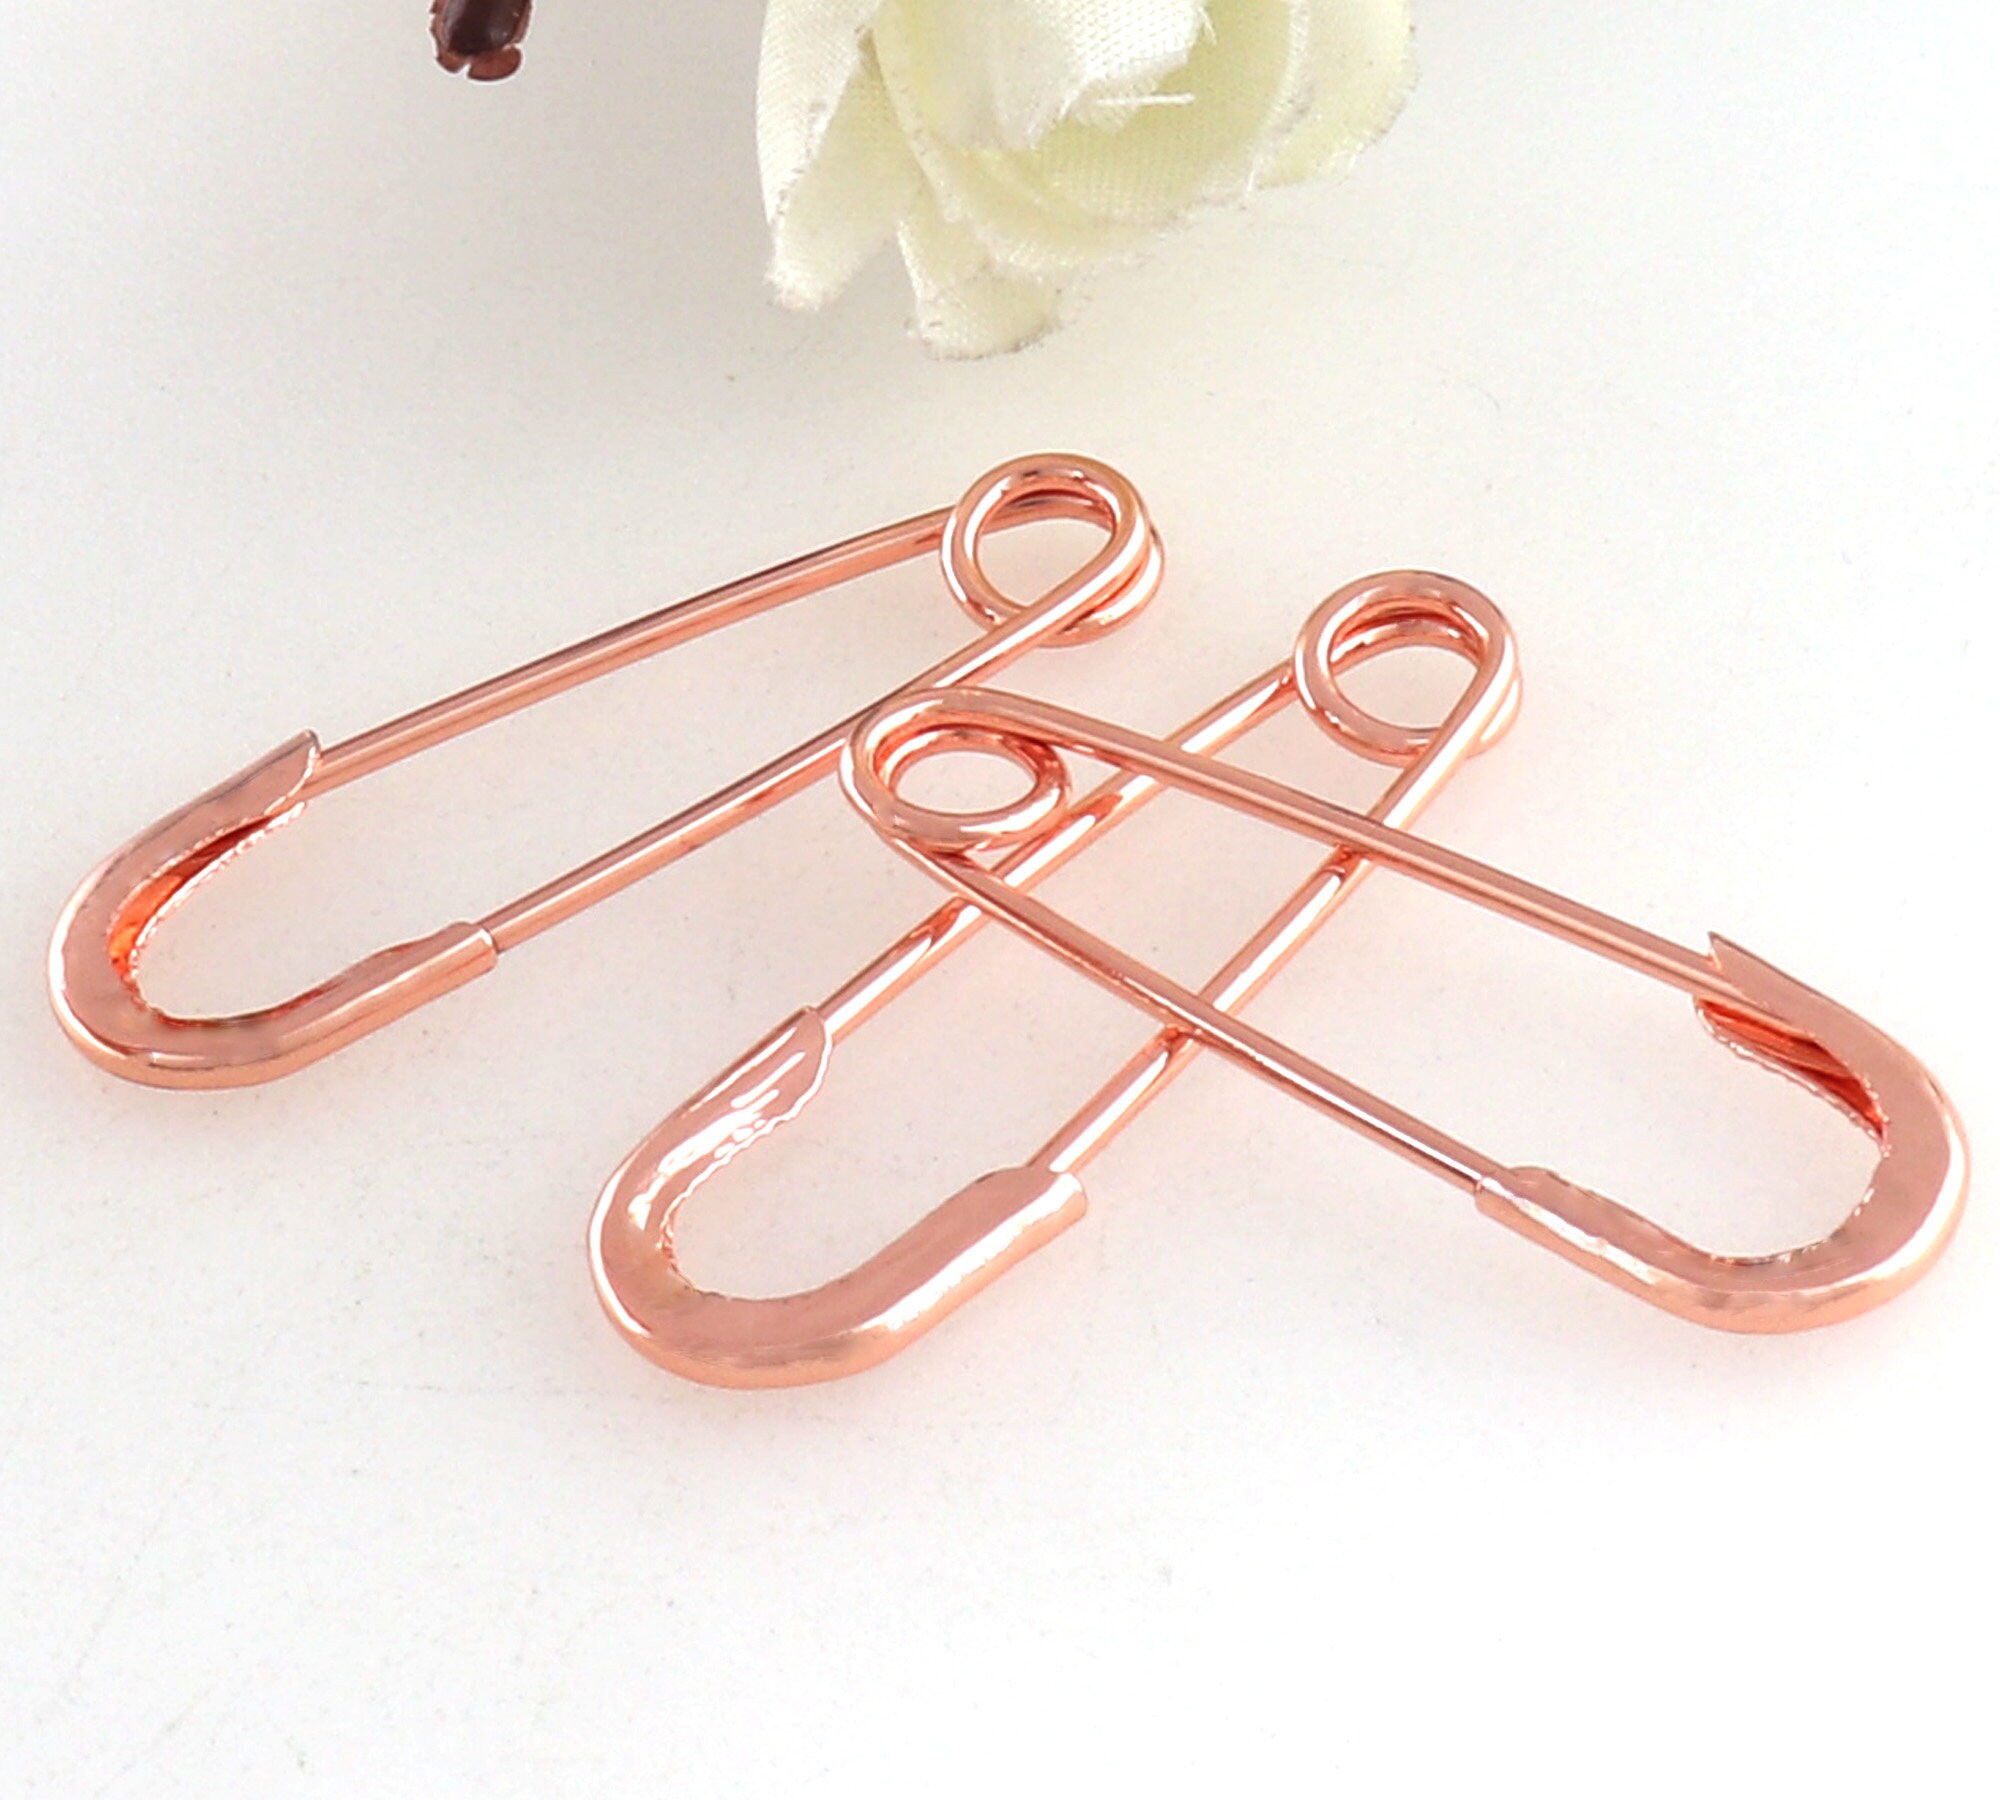 Gold 8 Pcs 80mm Large Safety Pin Giant / Jumbo Horse Blanket Pins /craft  Supplies for Creative Crafting Safety Pins 